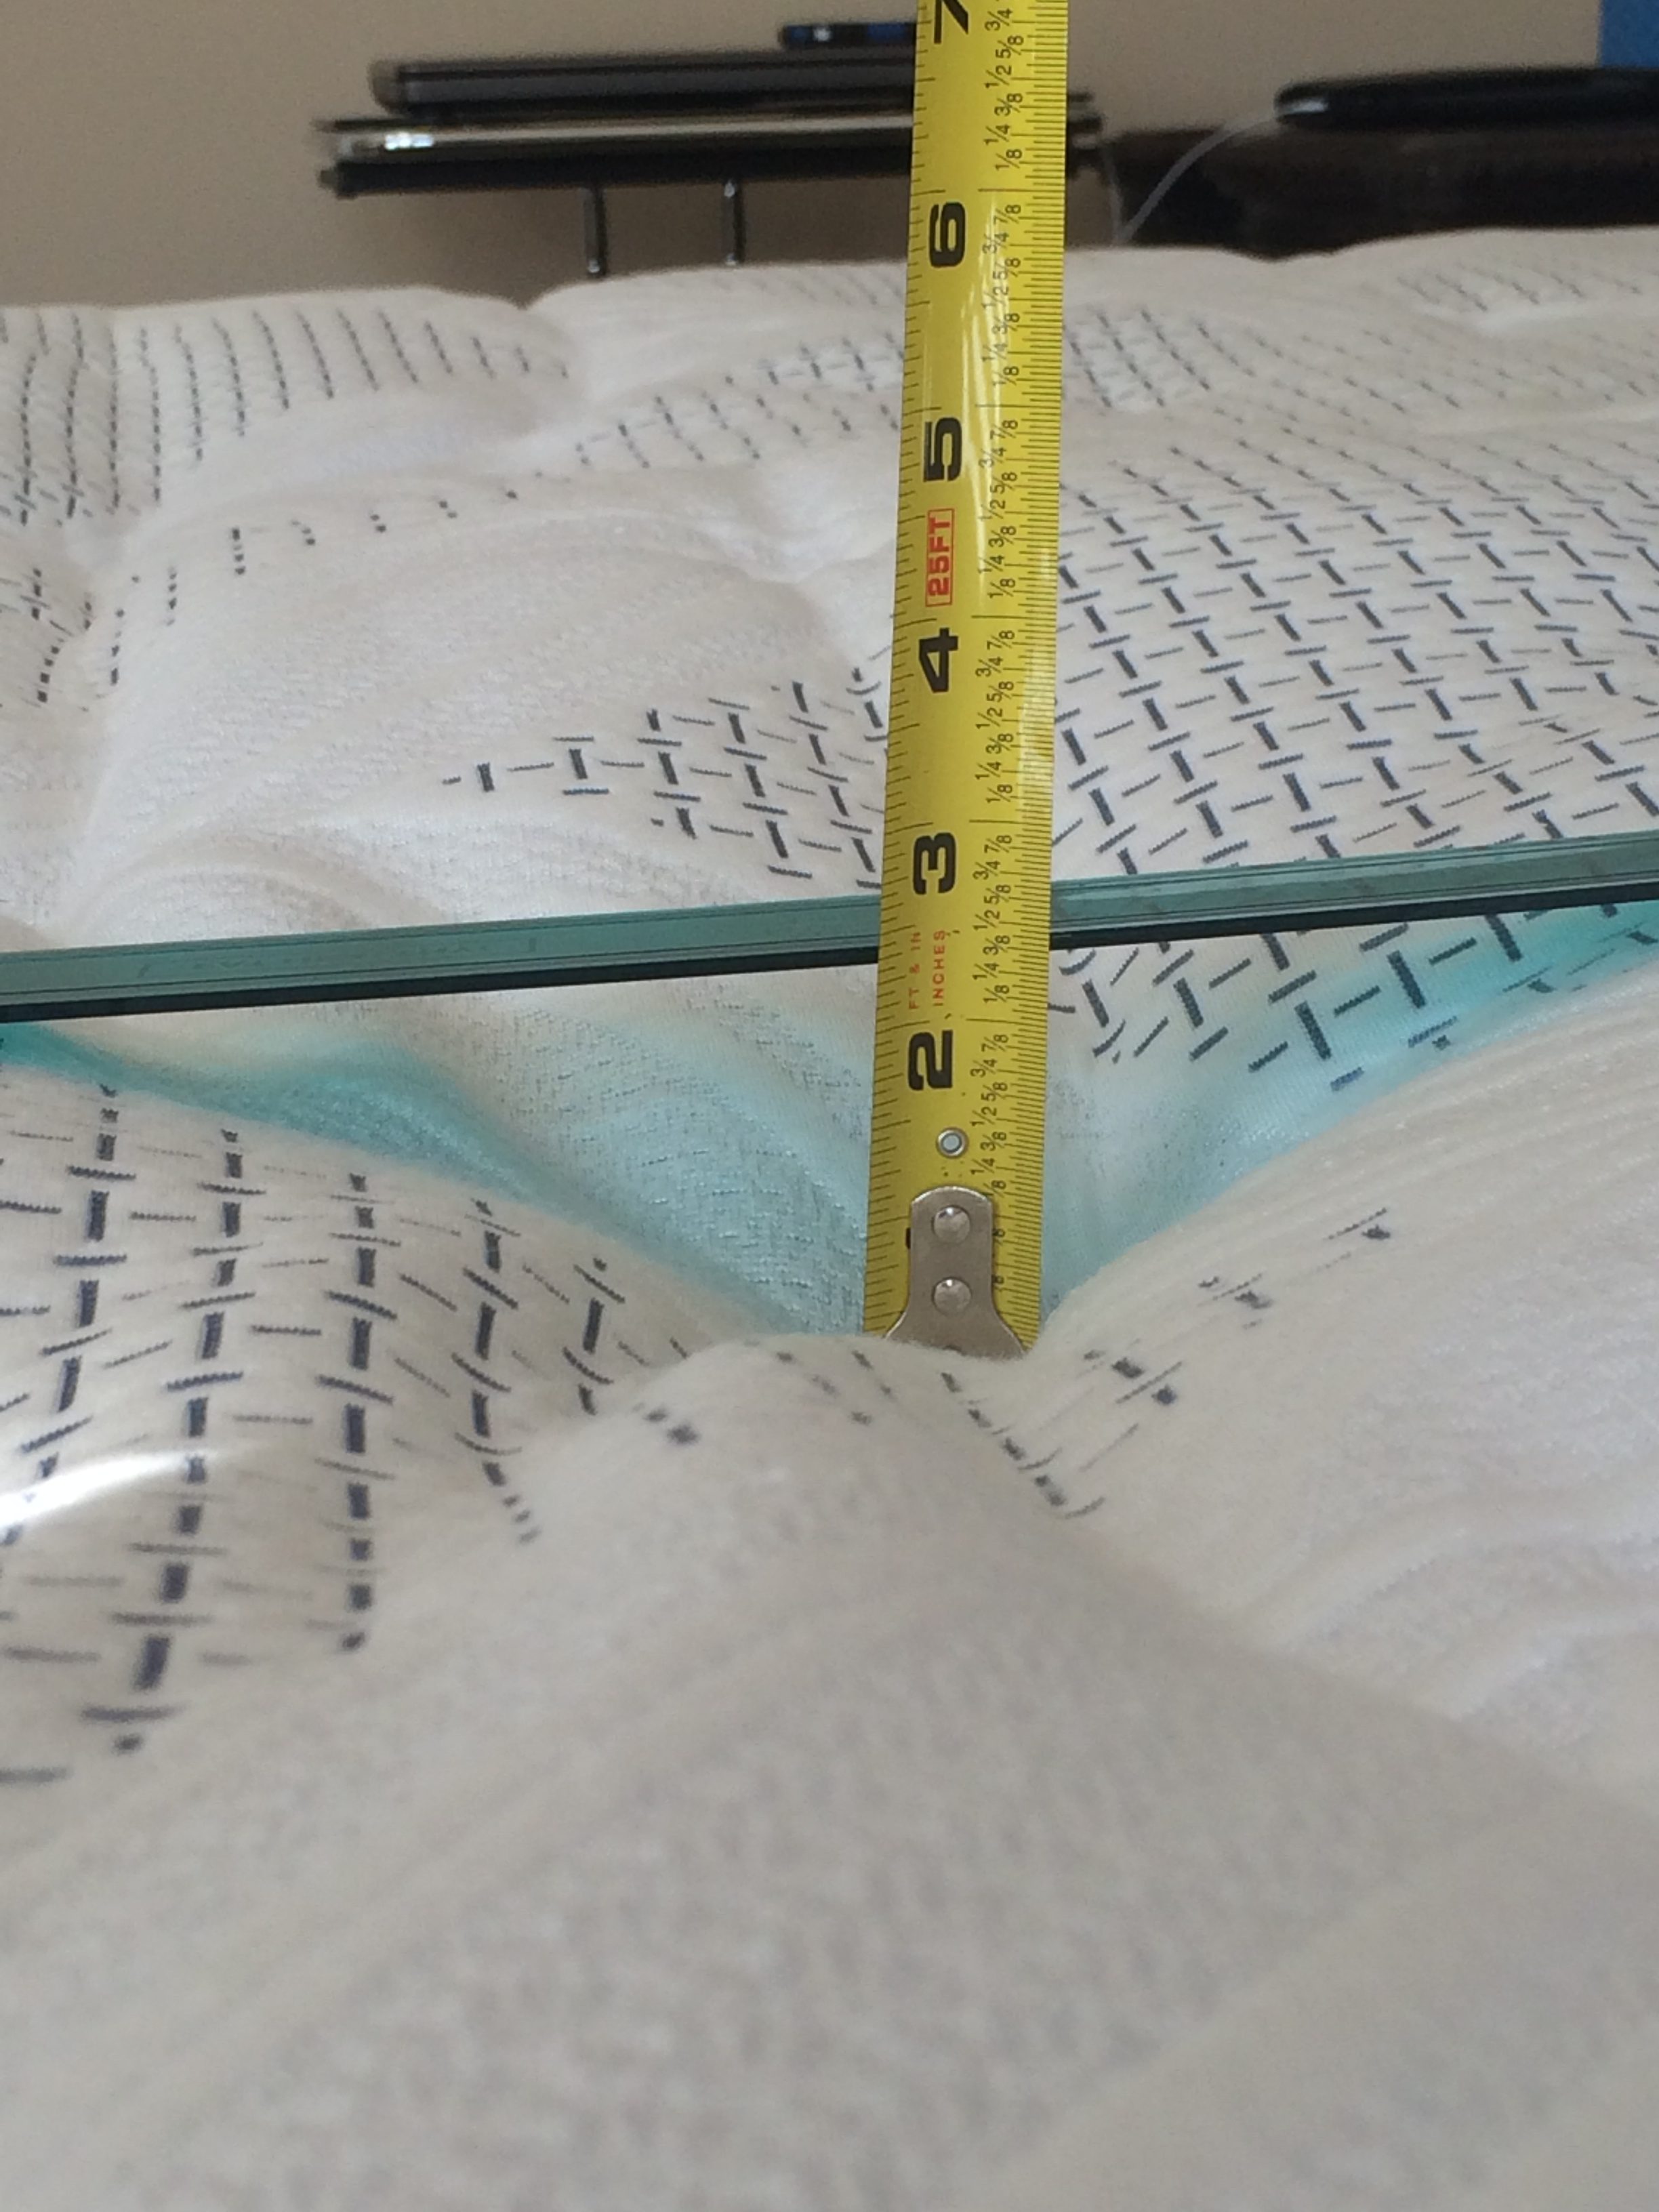 Are mattresses measured in inches?